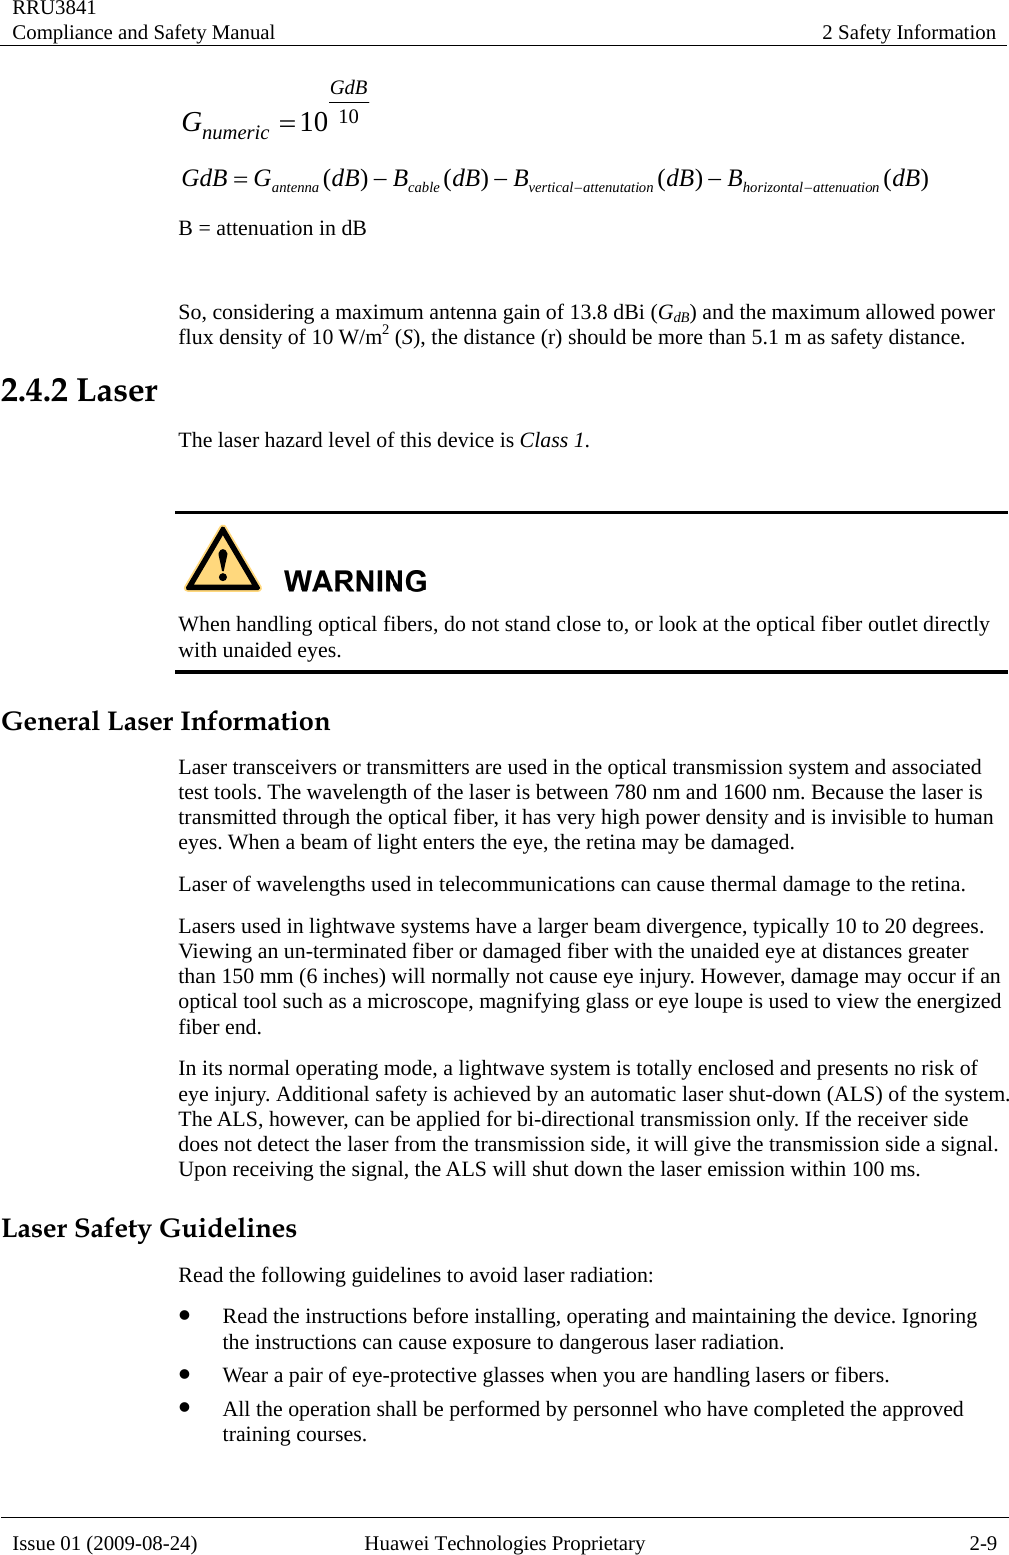 RRU3841 Compliance and Safety Manual  2 Safety Information  Issue 01 (2009-08-24)  Huawei Technologies Proprietary  2-9 1010GdBnumericG= )()()()( dBBdBBdBBdBGGdB nattenuatiohorizontalonattenutativerticalcableantenna −−−−−=  B = attenuation in dB  So, considering a maximum antenna gain of 13.8 dBi (GdB) and the maximum allowed power flux density of 10 W/m2 (S), the distance (r) should be more than 5.1 m as safety distance. 2.4.2 Laser The laser hazard level of this device is Class 1.   When handling optical fibers, do not stand close to, or look at the optical fiber outlet directly with unaided eyes. General Laser Information Laser transceivers or transmitters are used in the optical transmission system and associated test tools. The wavelength of the laser is between 780 nm and 1600 nm. Because the laser is transmitted through the optical fiber, it has very high power density and is invisible to human eyes. When a beam of light enters the eye, the retina may be damaged. Laser of wavelengths used in telecommunications can cause thermal damage to the retina. Lasers used in lightwave systems have a larger beam divergence, typically 10 to 20 degrees. Viewing an un-terminated fiber or damaged fiber with the unaided eye at distances greater than 150 mm (6 inches) will normally not cause eye injury. However, damage may occur if an optical tool such as a microscope, magnifying glass or eye loupe is used to view the energized fiber end. In its normal operating mode, a lightwave system is totally enclosed and presents no risk of eye injury. Additional safety is achieved by an automatic laser shut-down (ALS) of the system. The ALS, however, can be applied for bi-directional transmission only. If the receiver side does not detect the laser from the transmission side, it will give the transmission side a signal. Upon receiving the signal, the ALS will shut down the laser emission within 100 ms. Laser Safety Guidelines Read the following guidelines to avoid laser radiation: z Read the instructions before installing, operating and maintaining the device. Ignoring the instructions can cause exposure to dangerous laser radiation. z Wear a pair of eye-protective glasses when you are handling lasers or fibers. z All the operation shall be performed by personnel who have completed the approved training courses. 